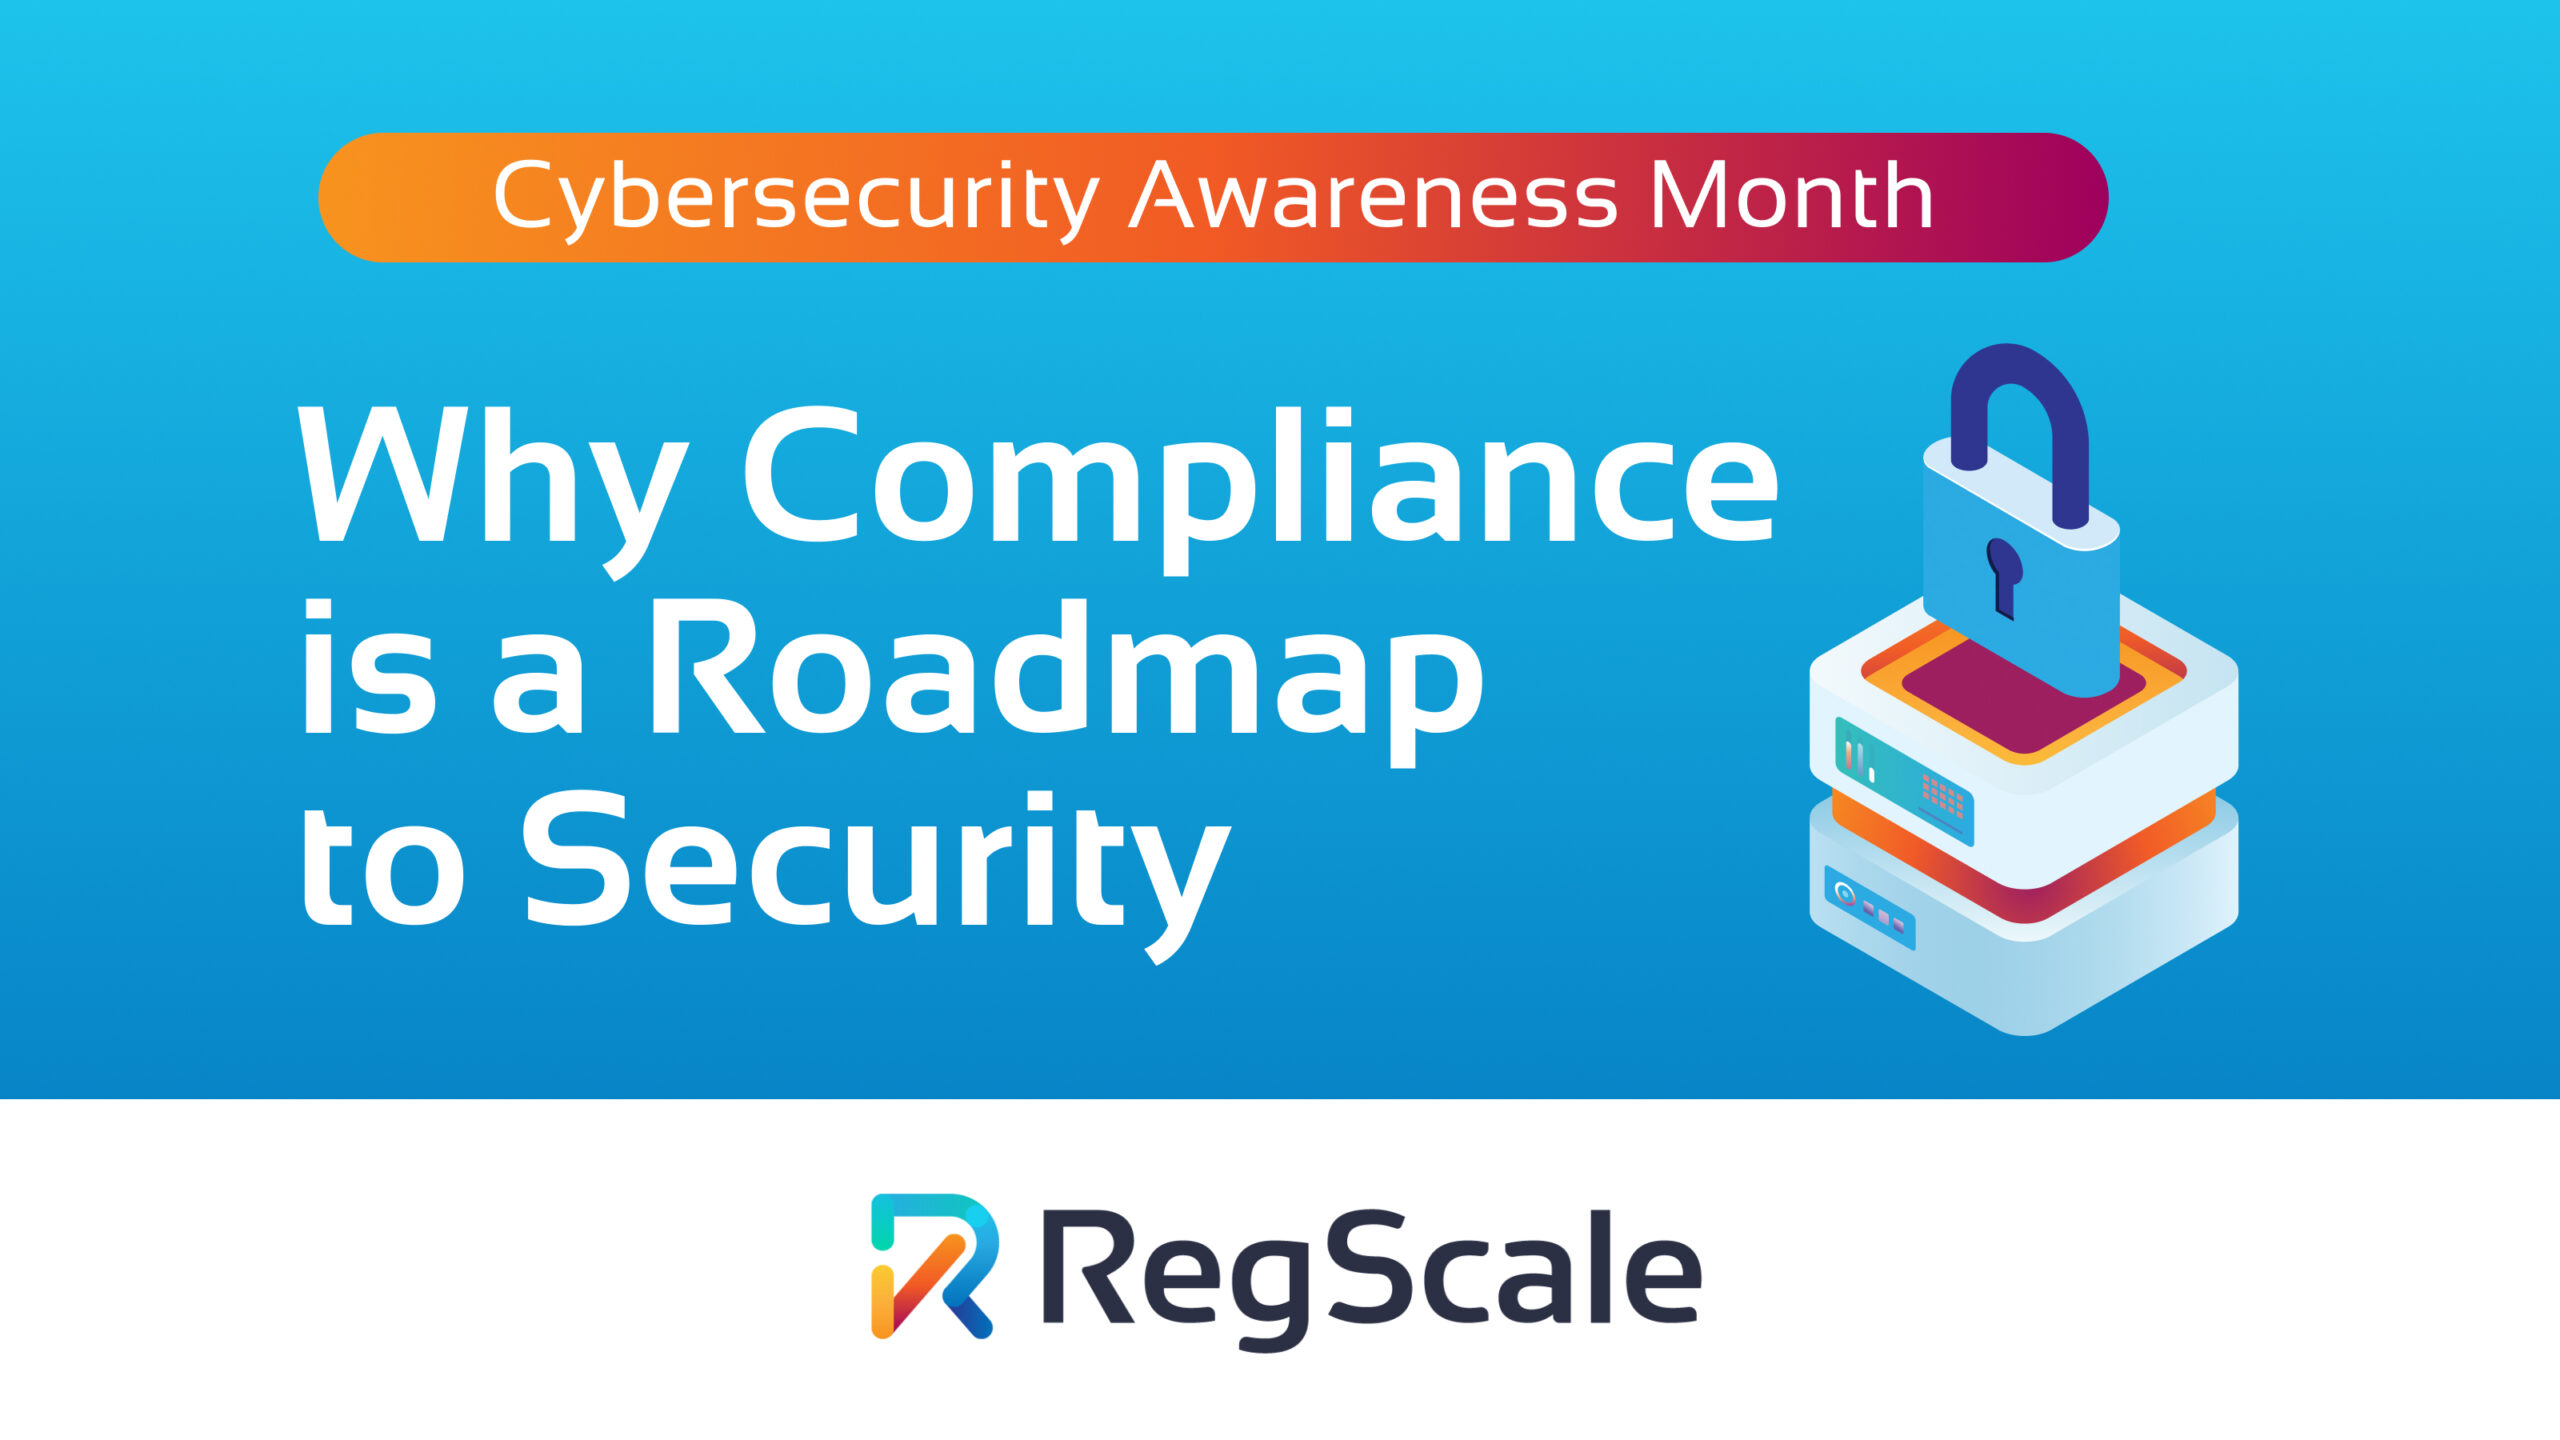 Why Compliance is a Roadmap to Security